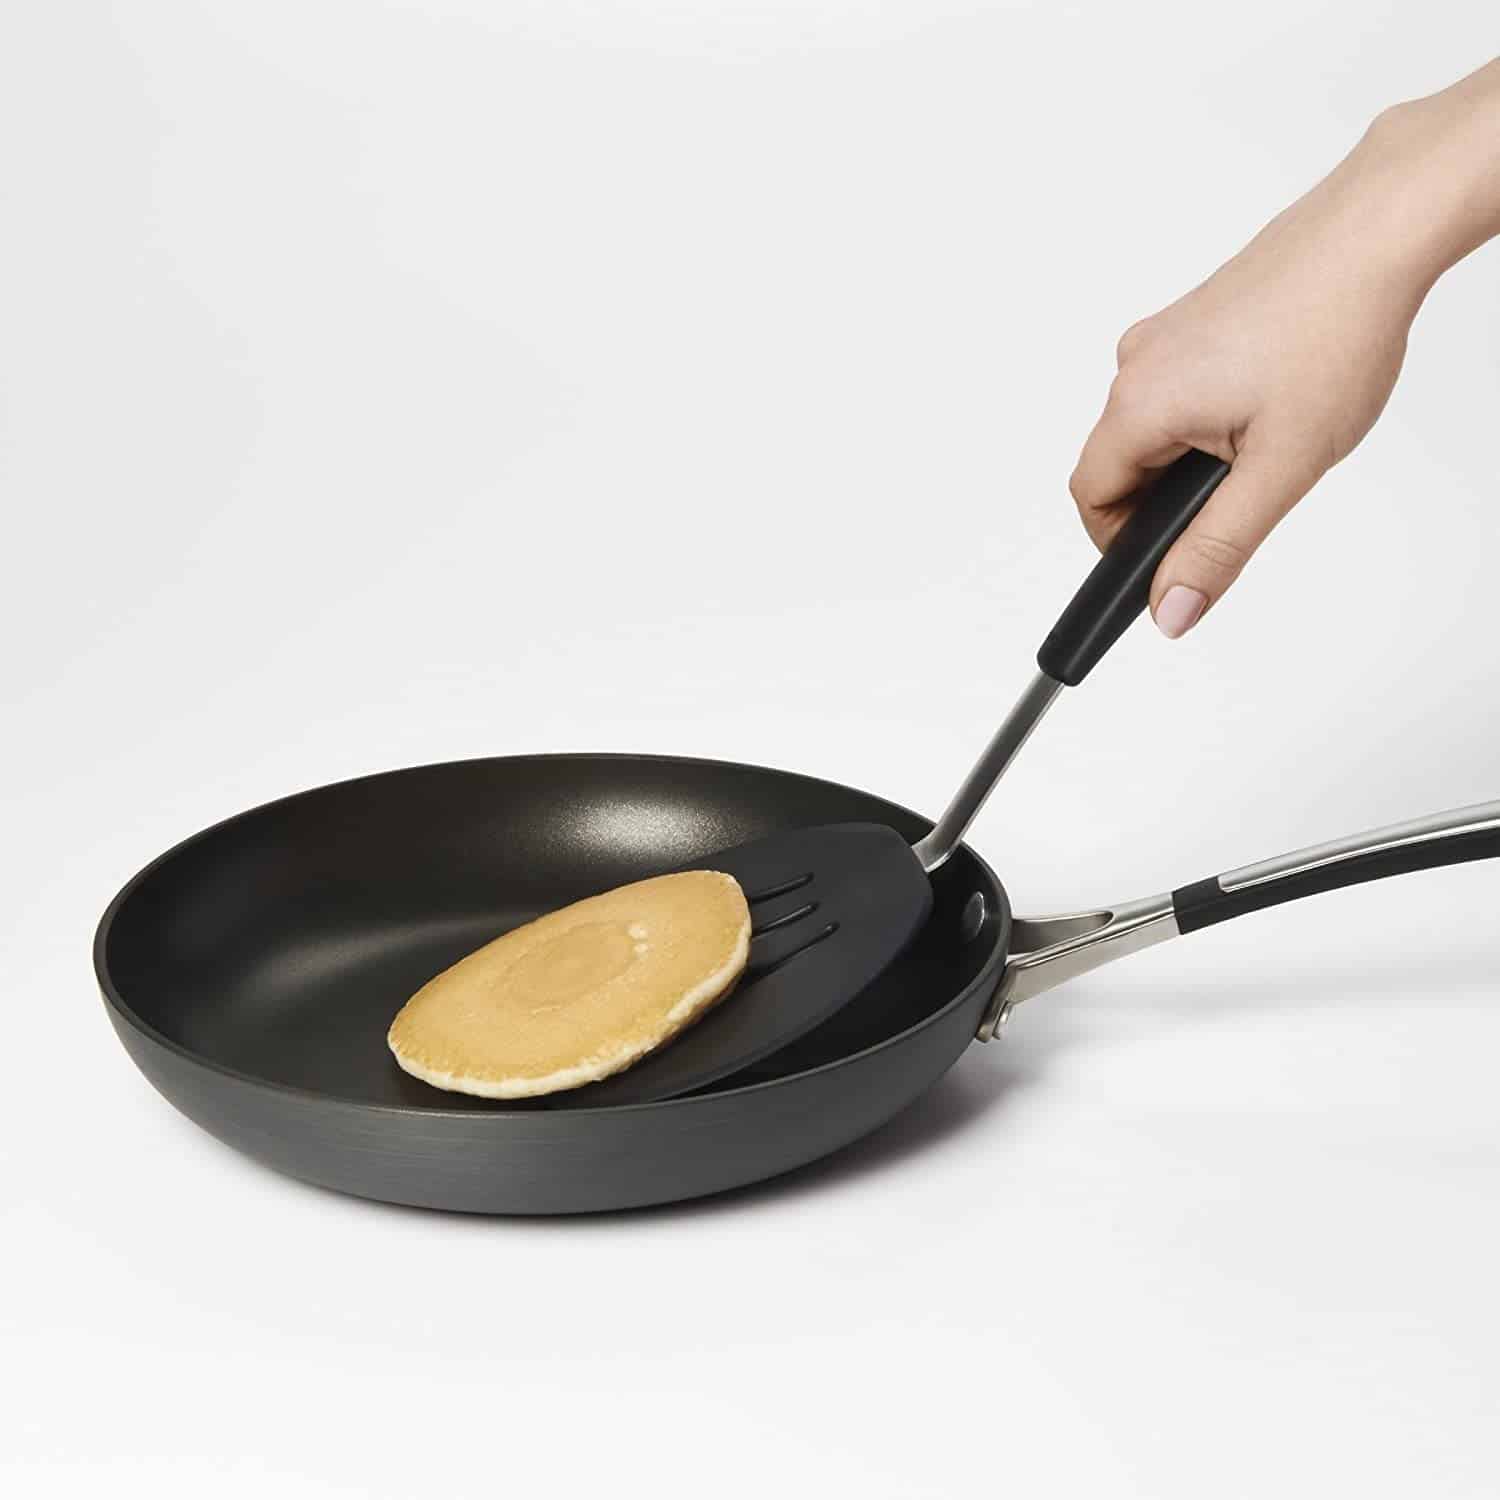 Best spatula for pancakes overall- OXO Good Grips Pancake Turner flipping a pancake